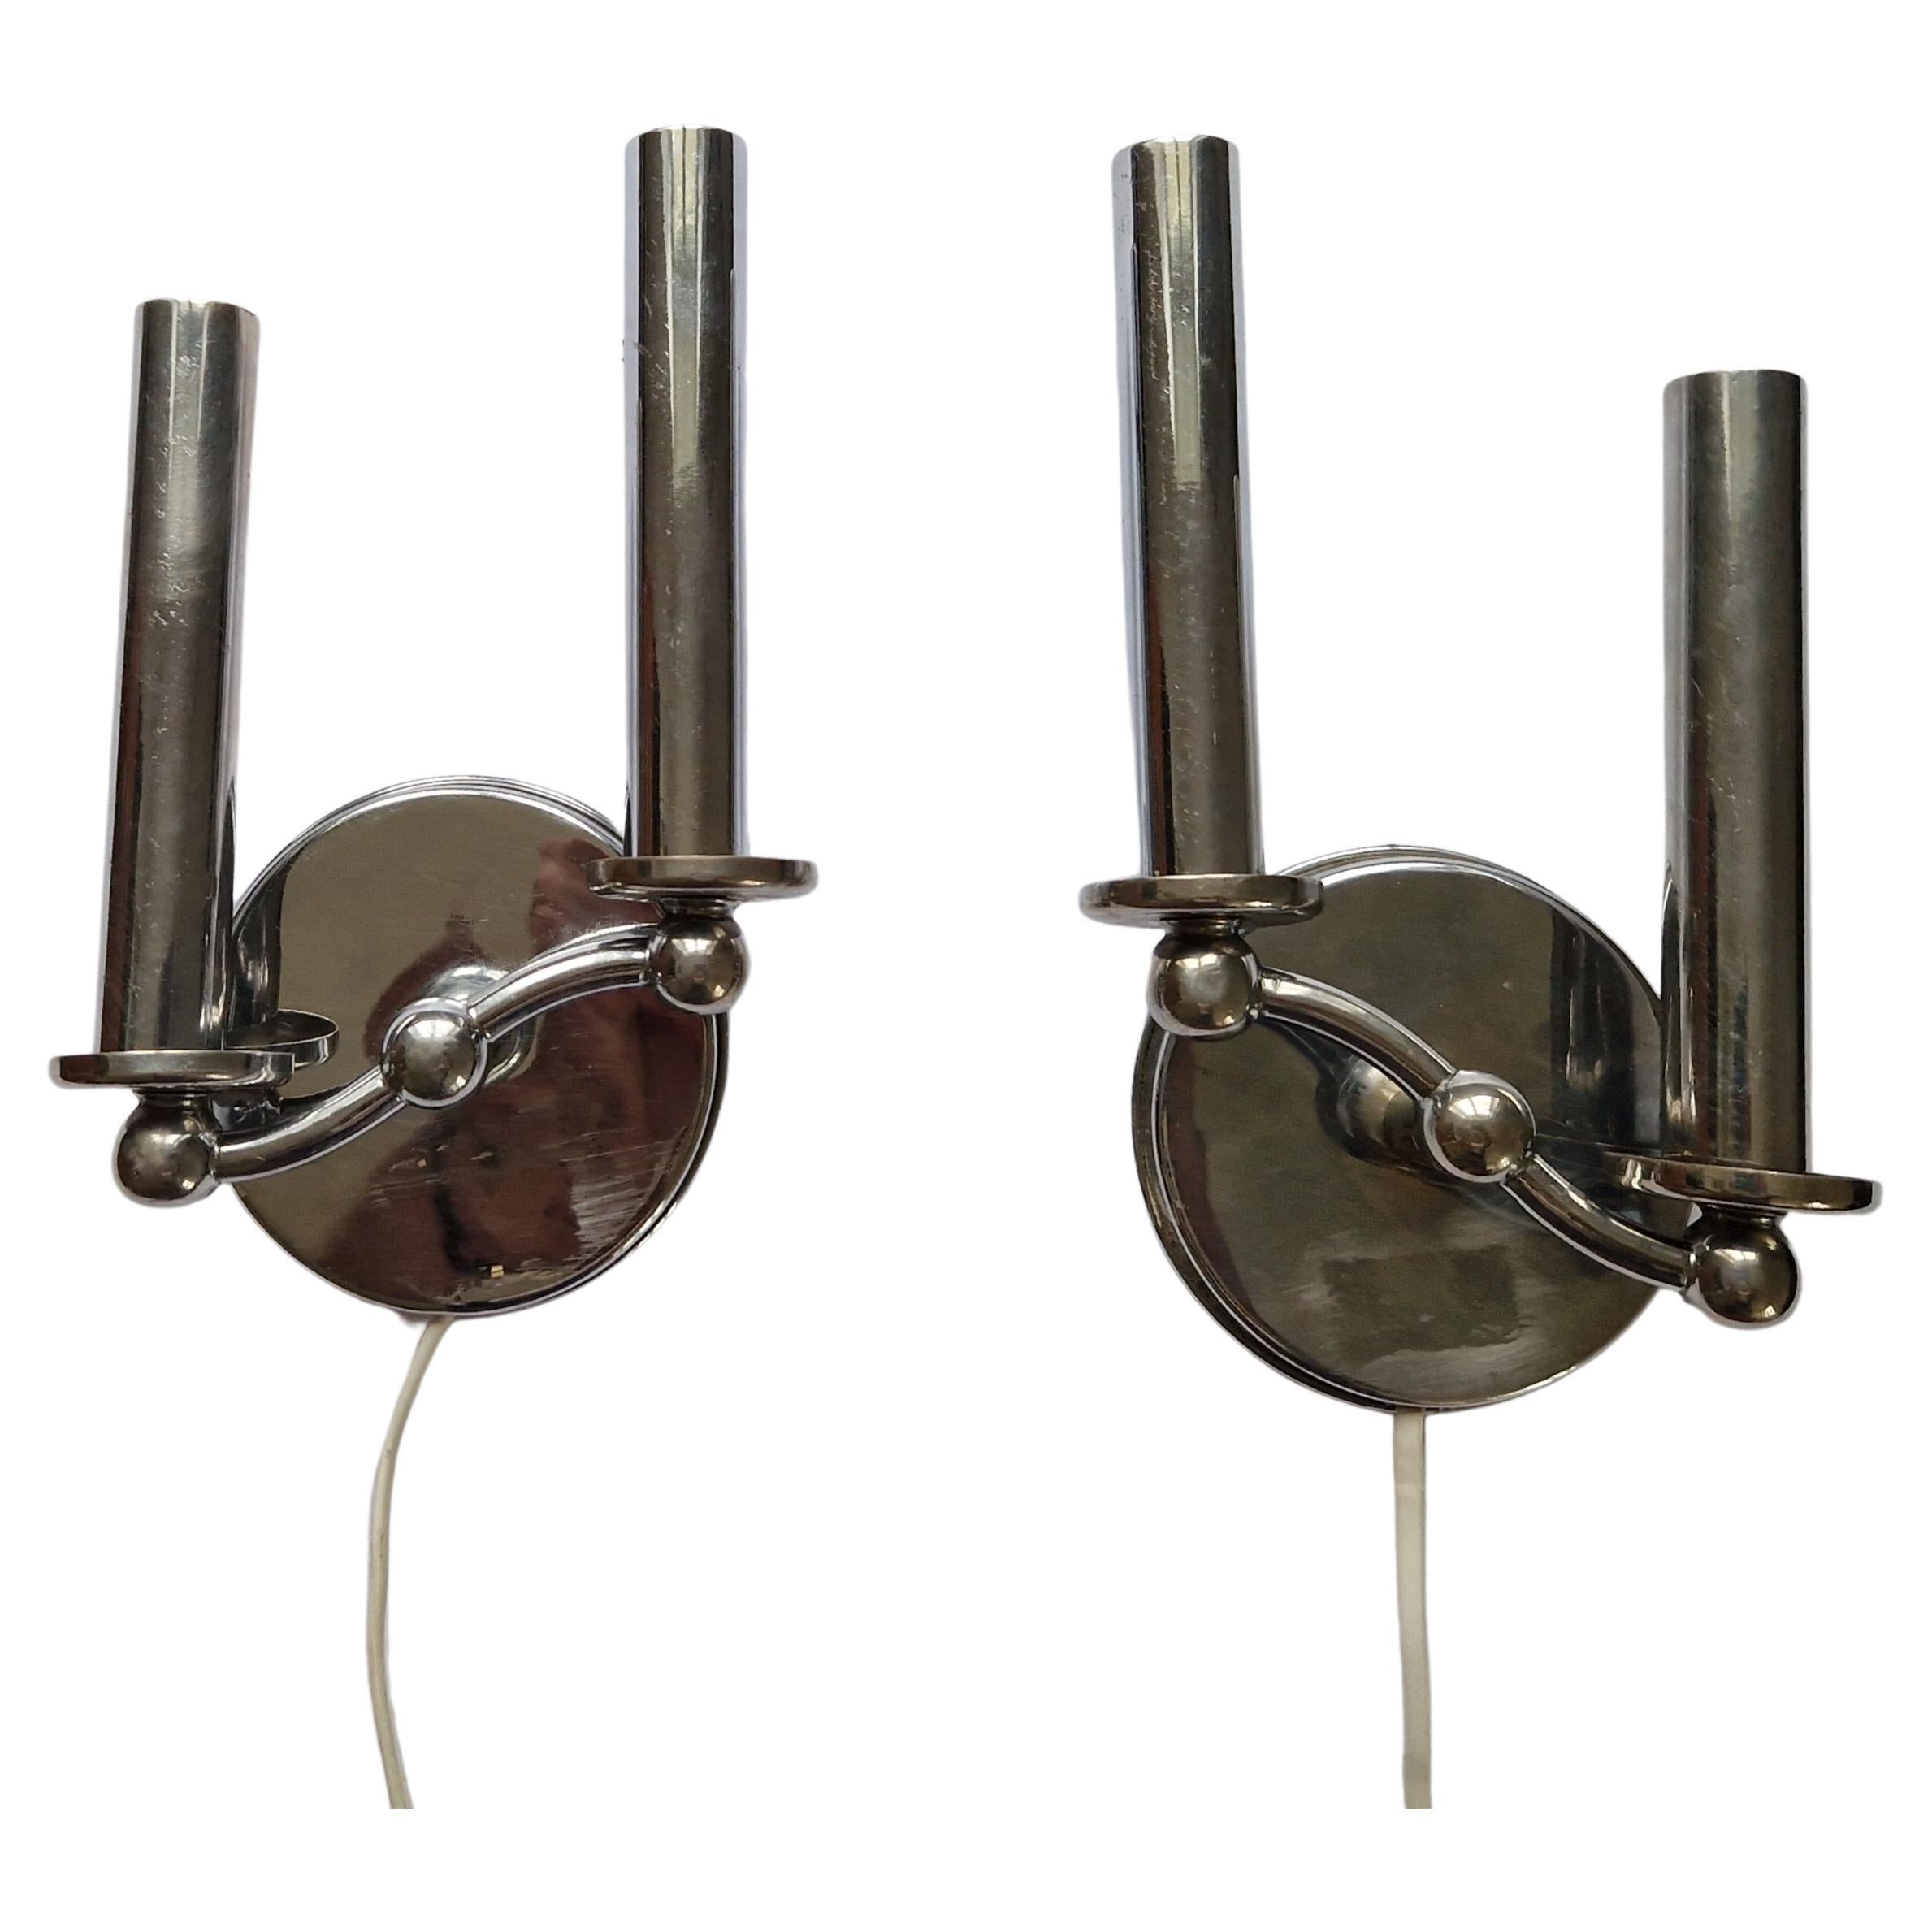 Pair of Rare Chrome Art Deco / Functionalism Wall Lamps, 1930s For Sale